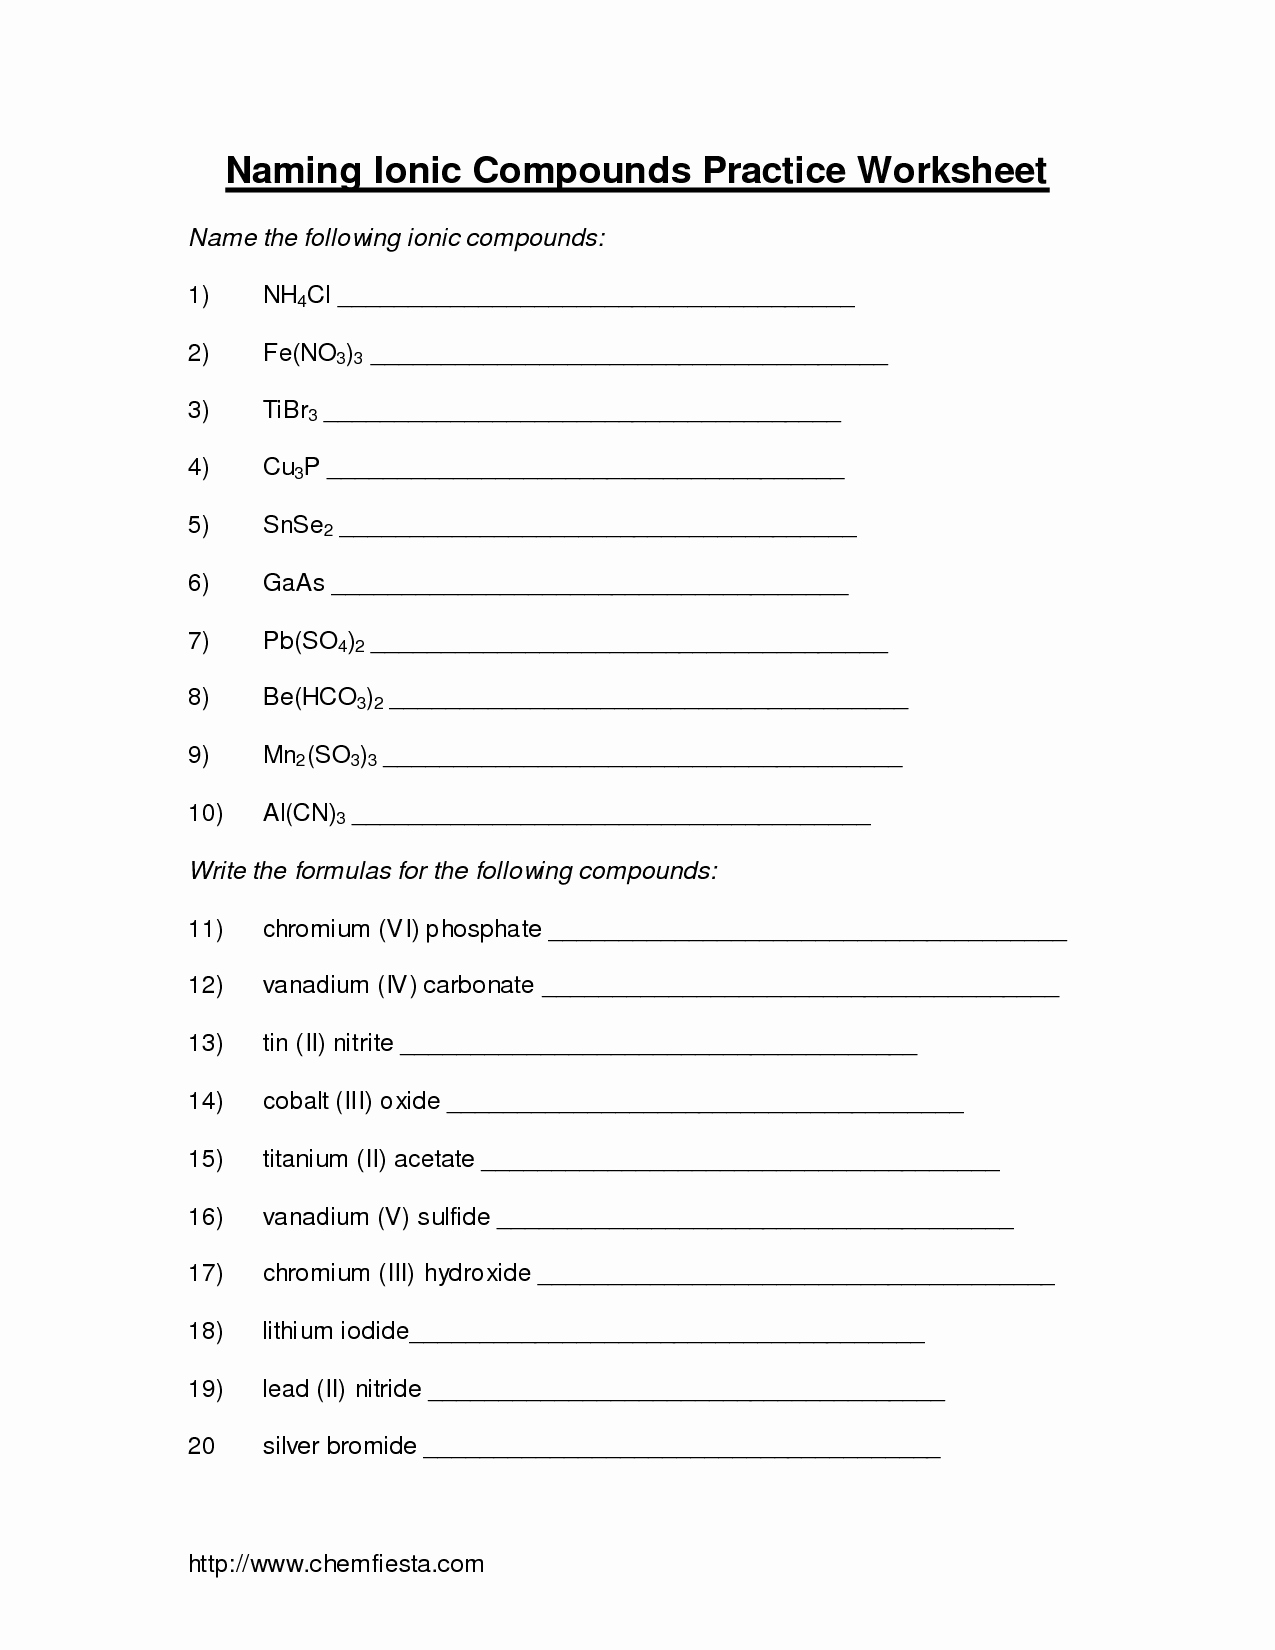 Naming Chemical Compounds Worksheet Answers Luxury Writing and Naming Ionic Pounds Worksheet Answer Key